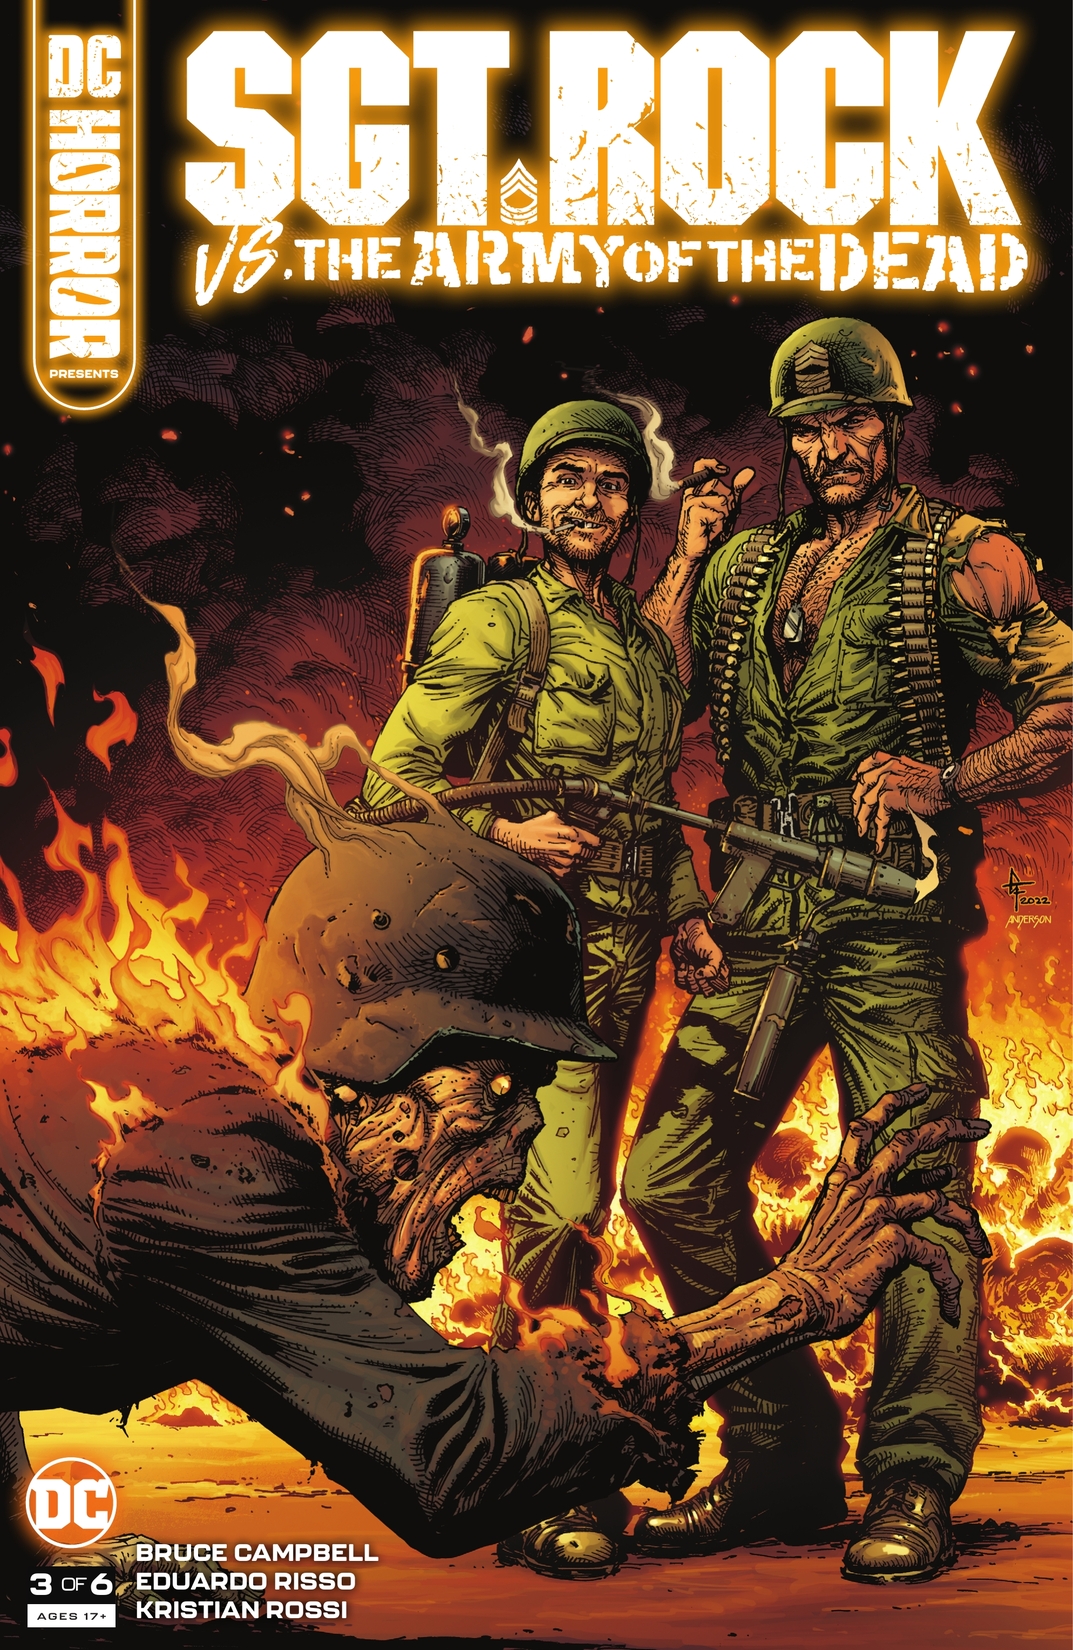 DC Horror Presents: Sgt. Rock vs. The Army of the Dead #3 preview images